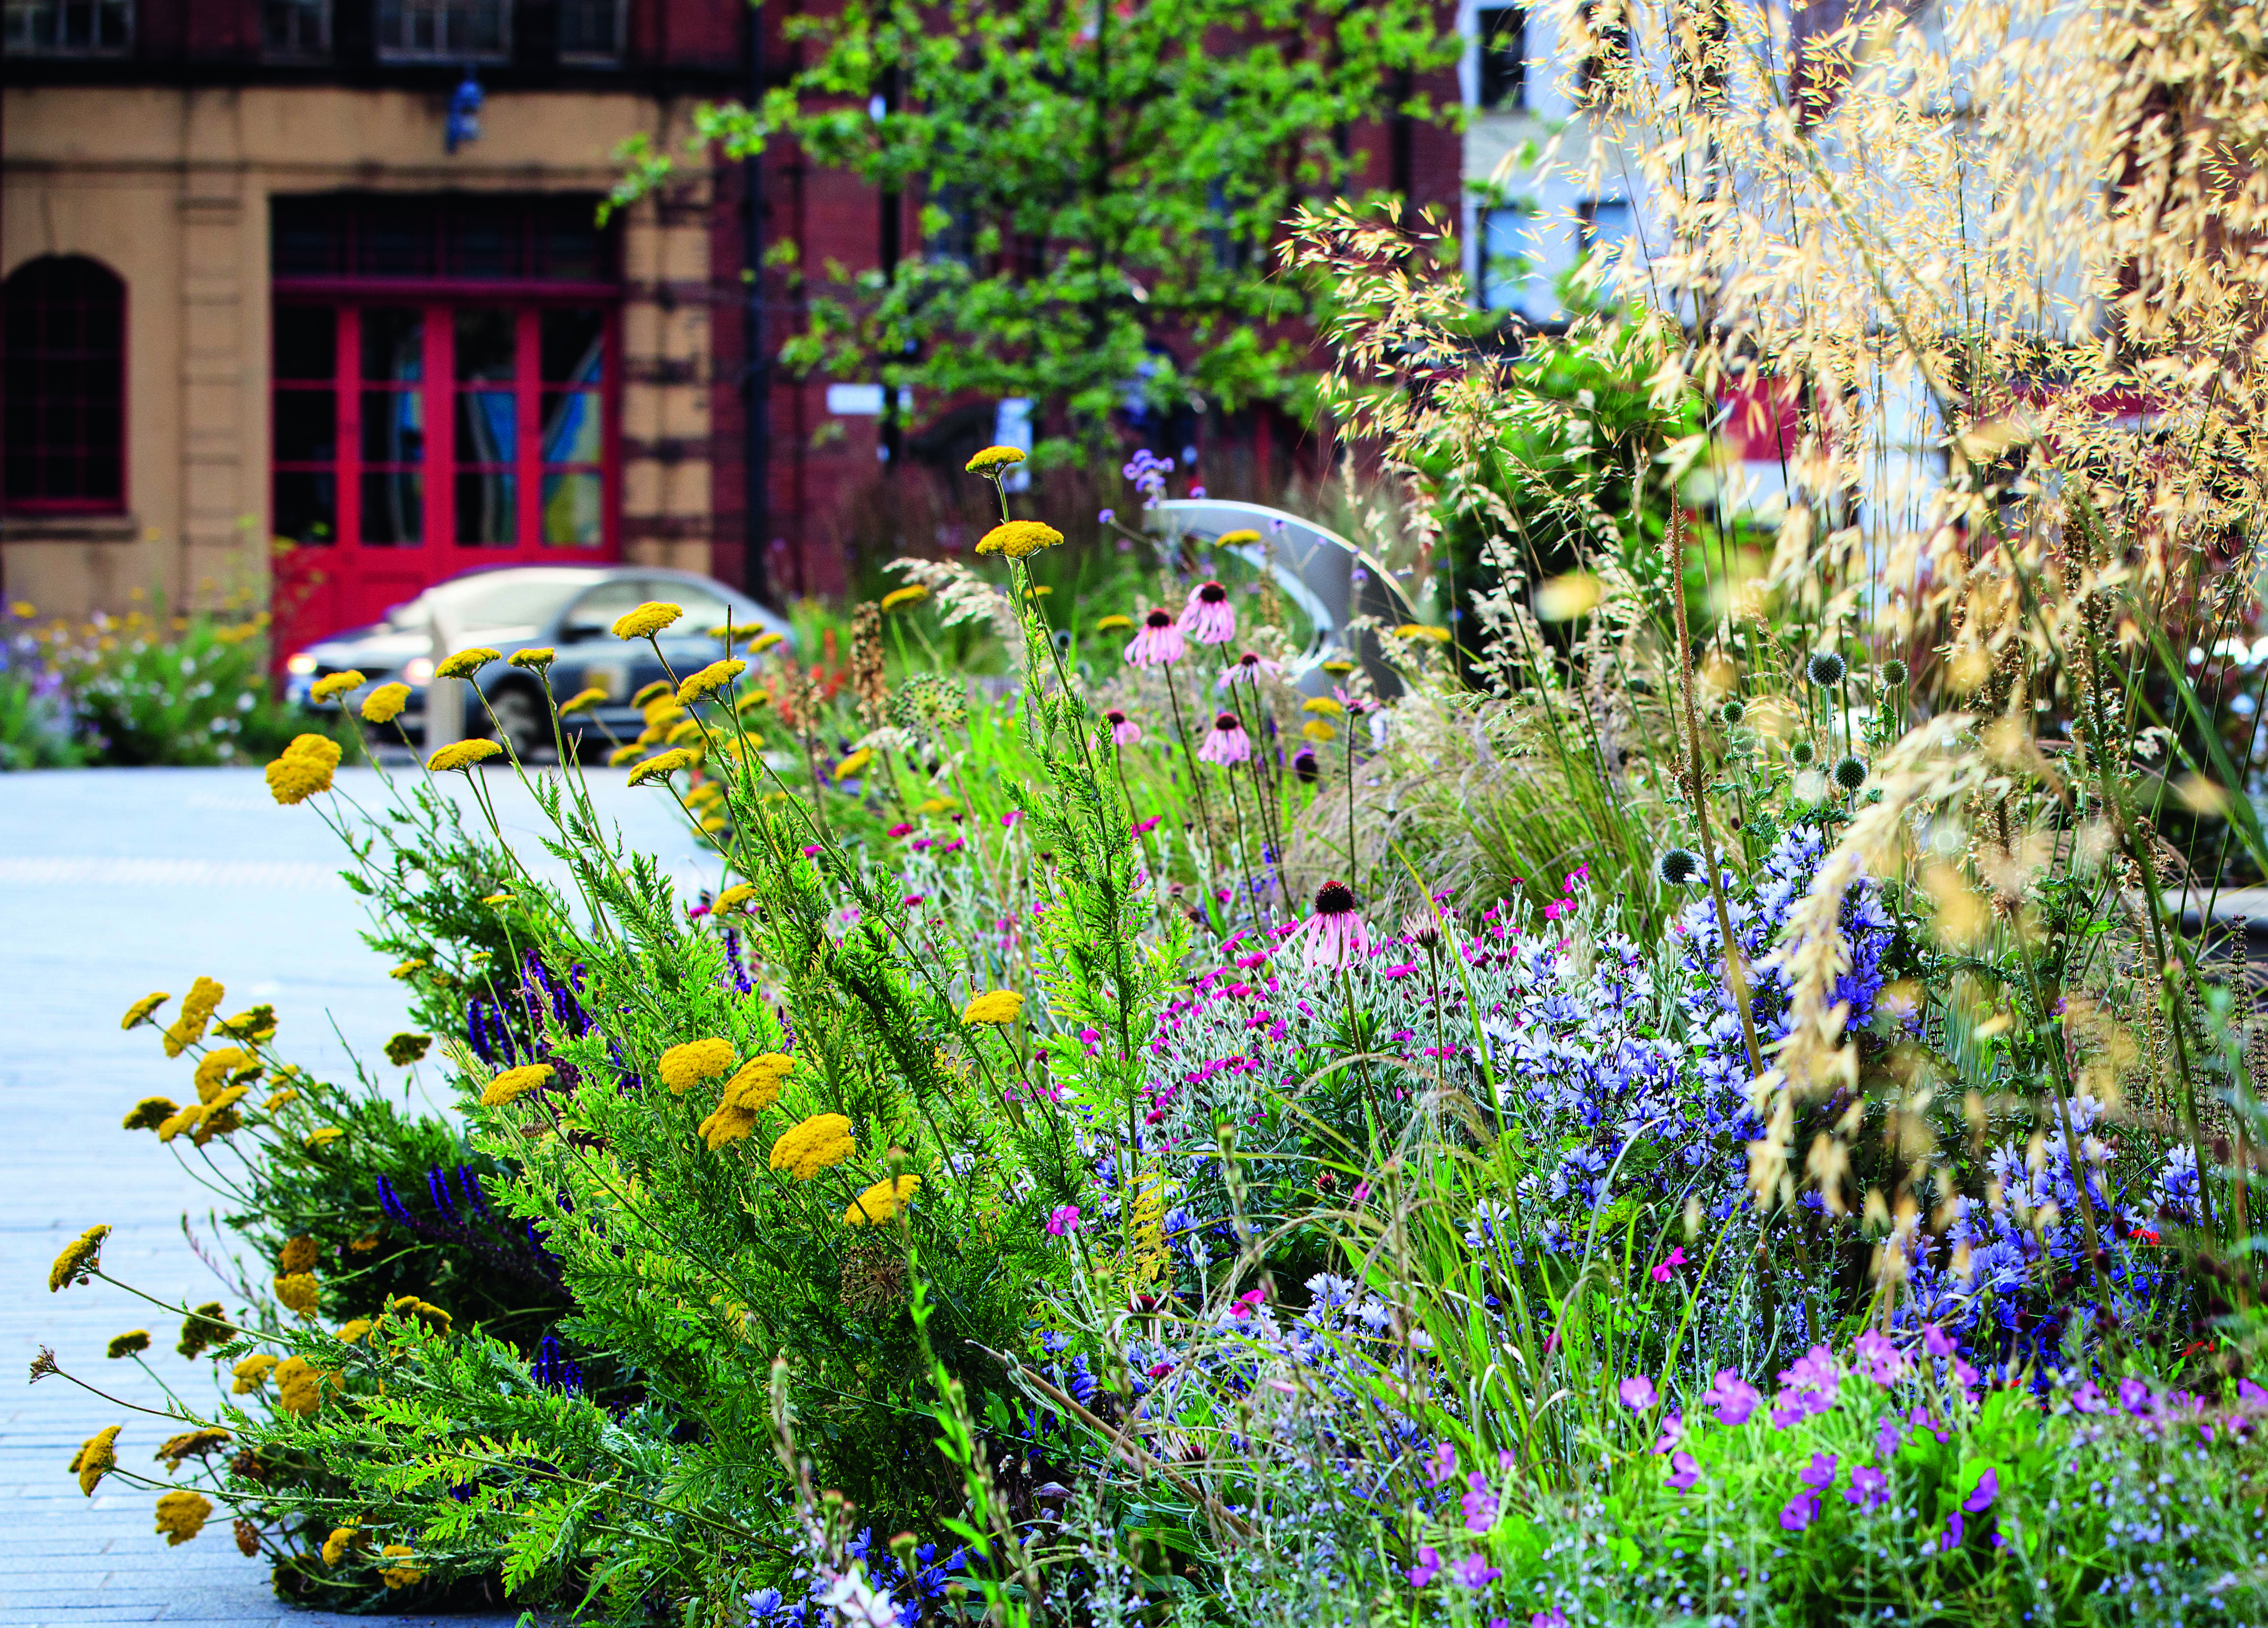 Grey to Green City Garden, Sheffield, South Yorkshire, England. Designer: Zac Tudor and Sheffield City Council landscape team. Photography by Claire Takacs. From Wild: The Naturalistic Garden